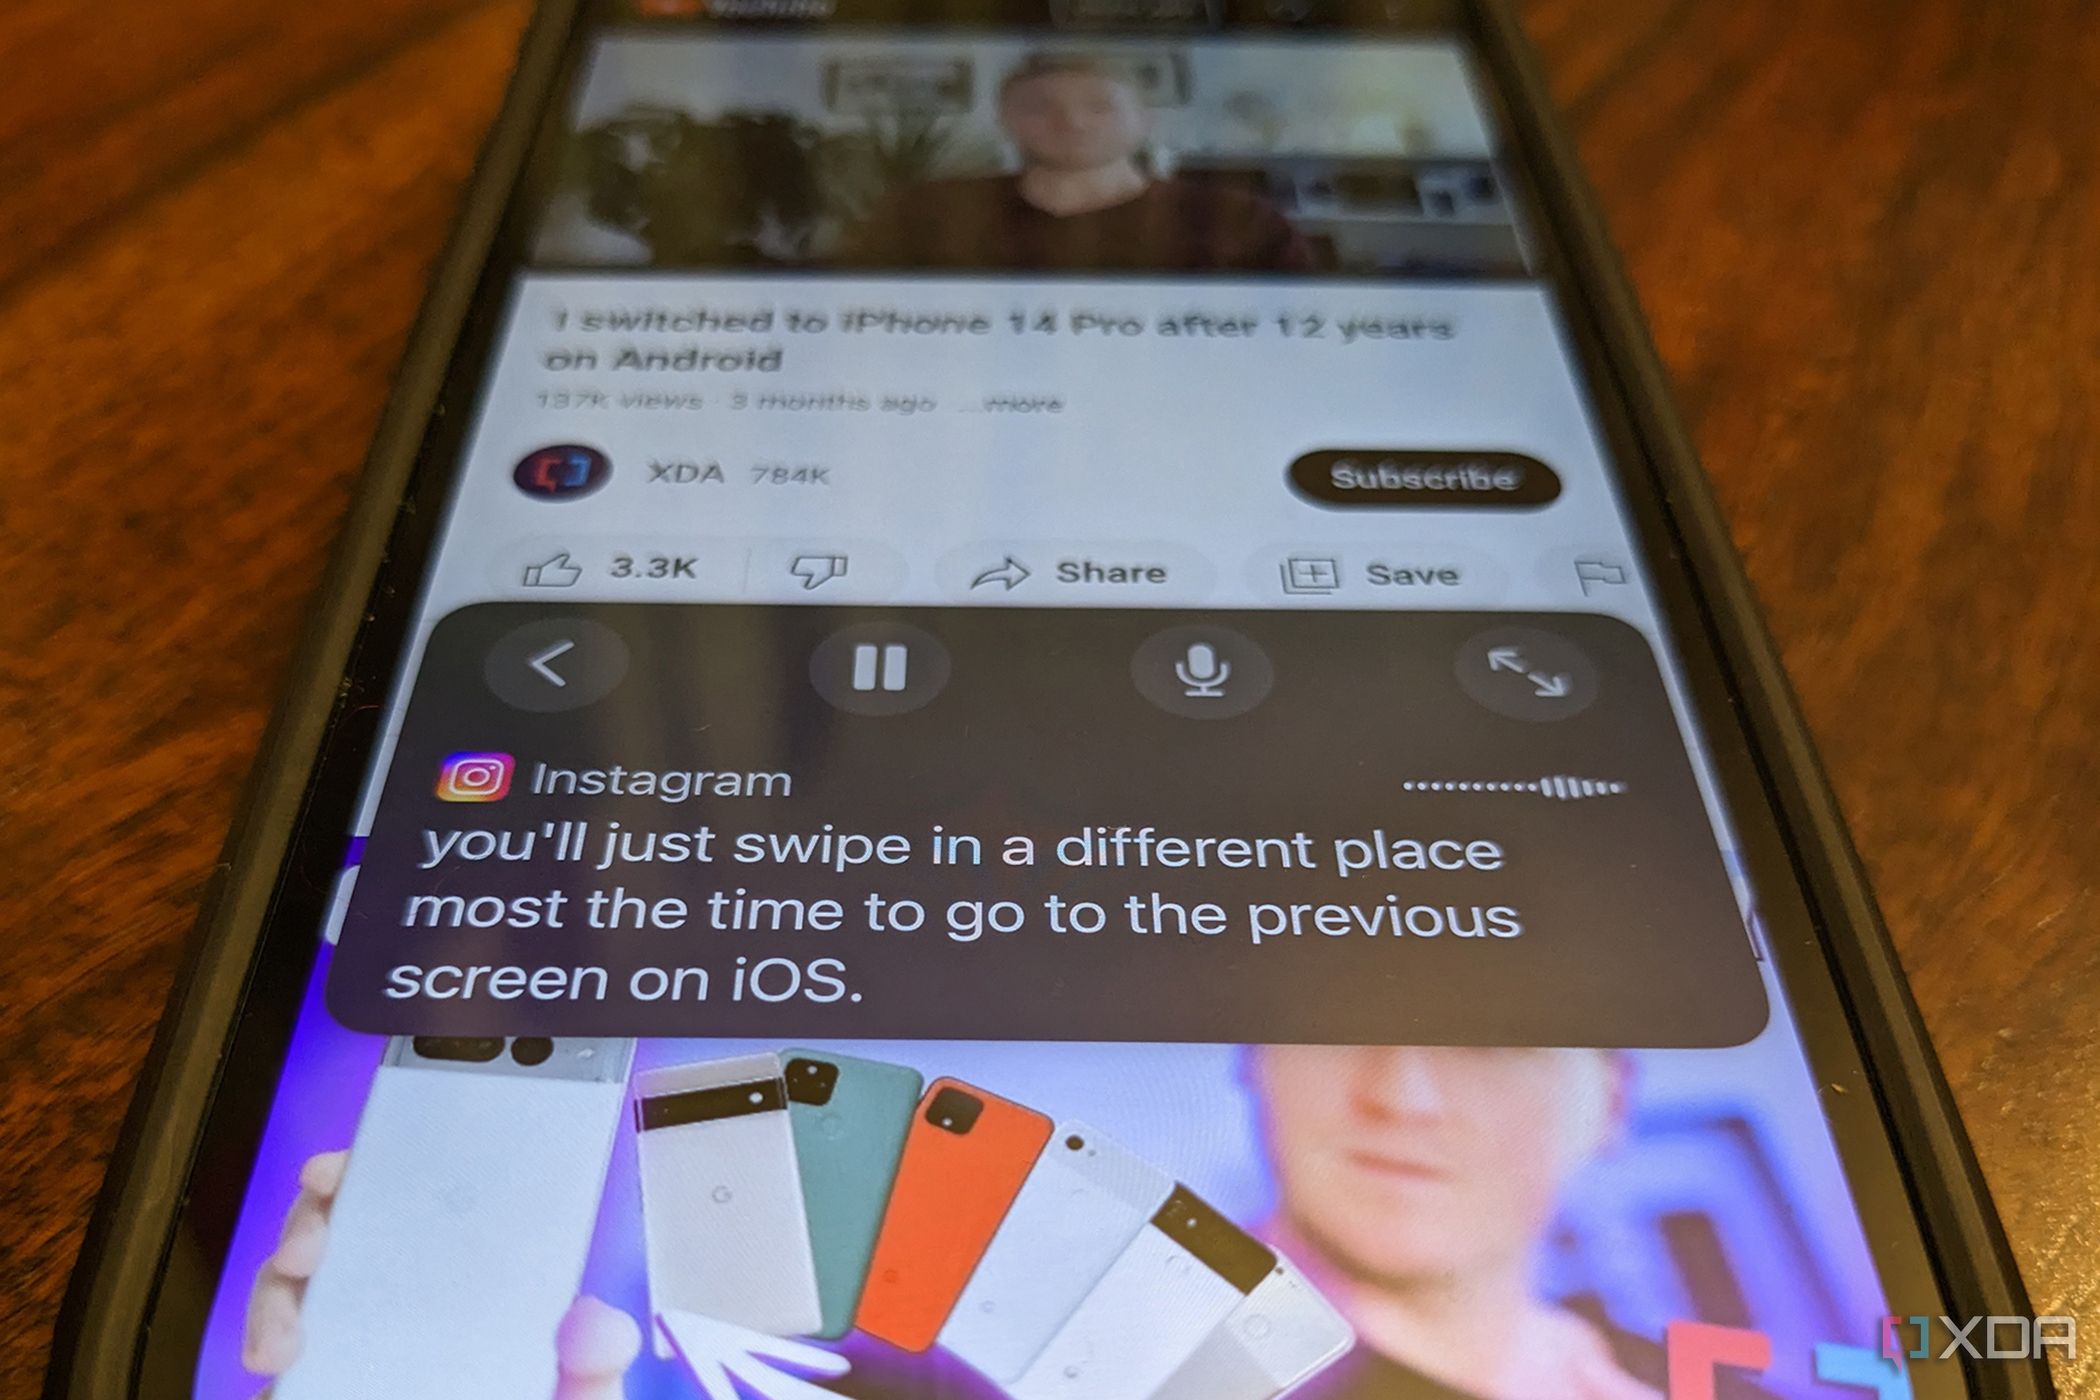 How to use live captions on iPhone